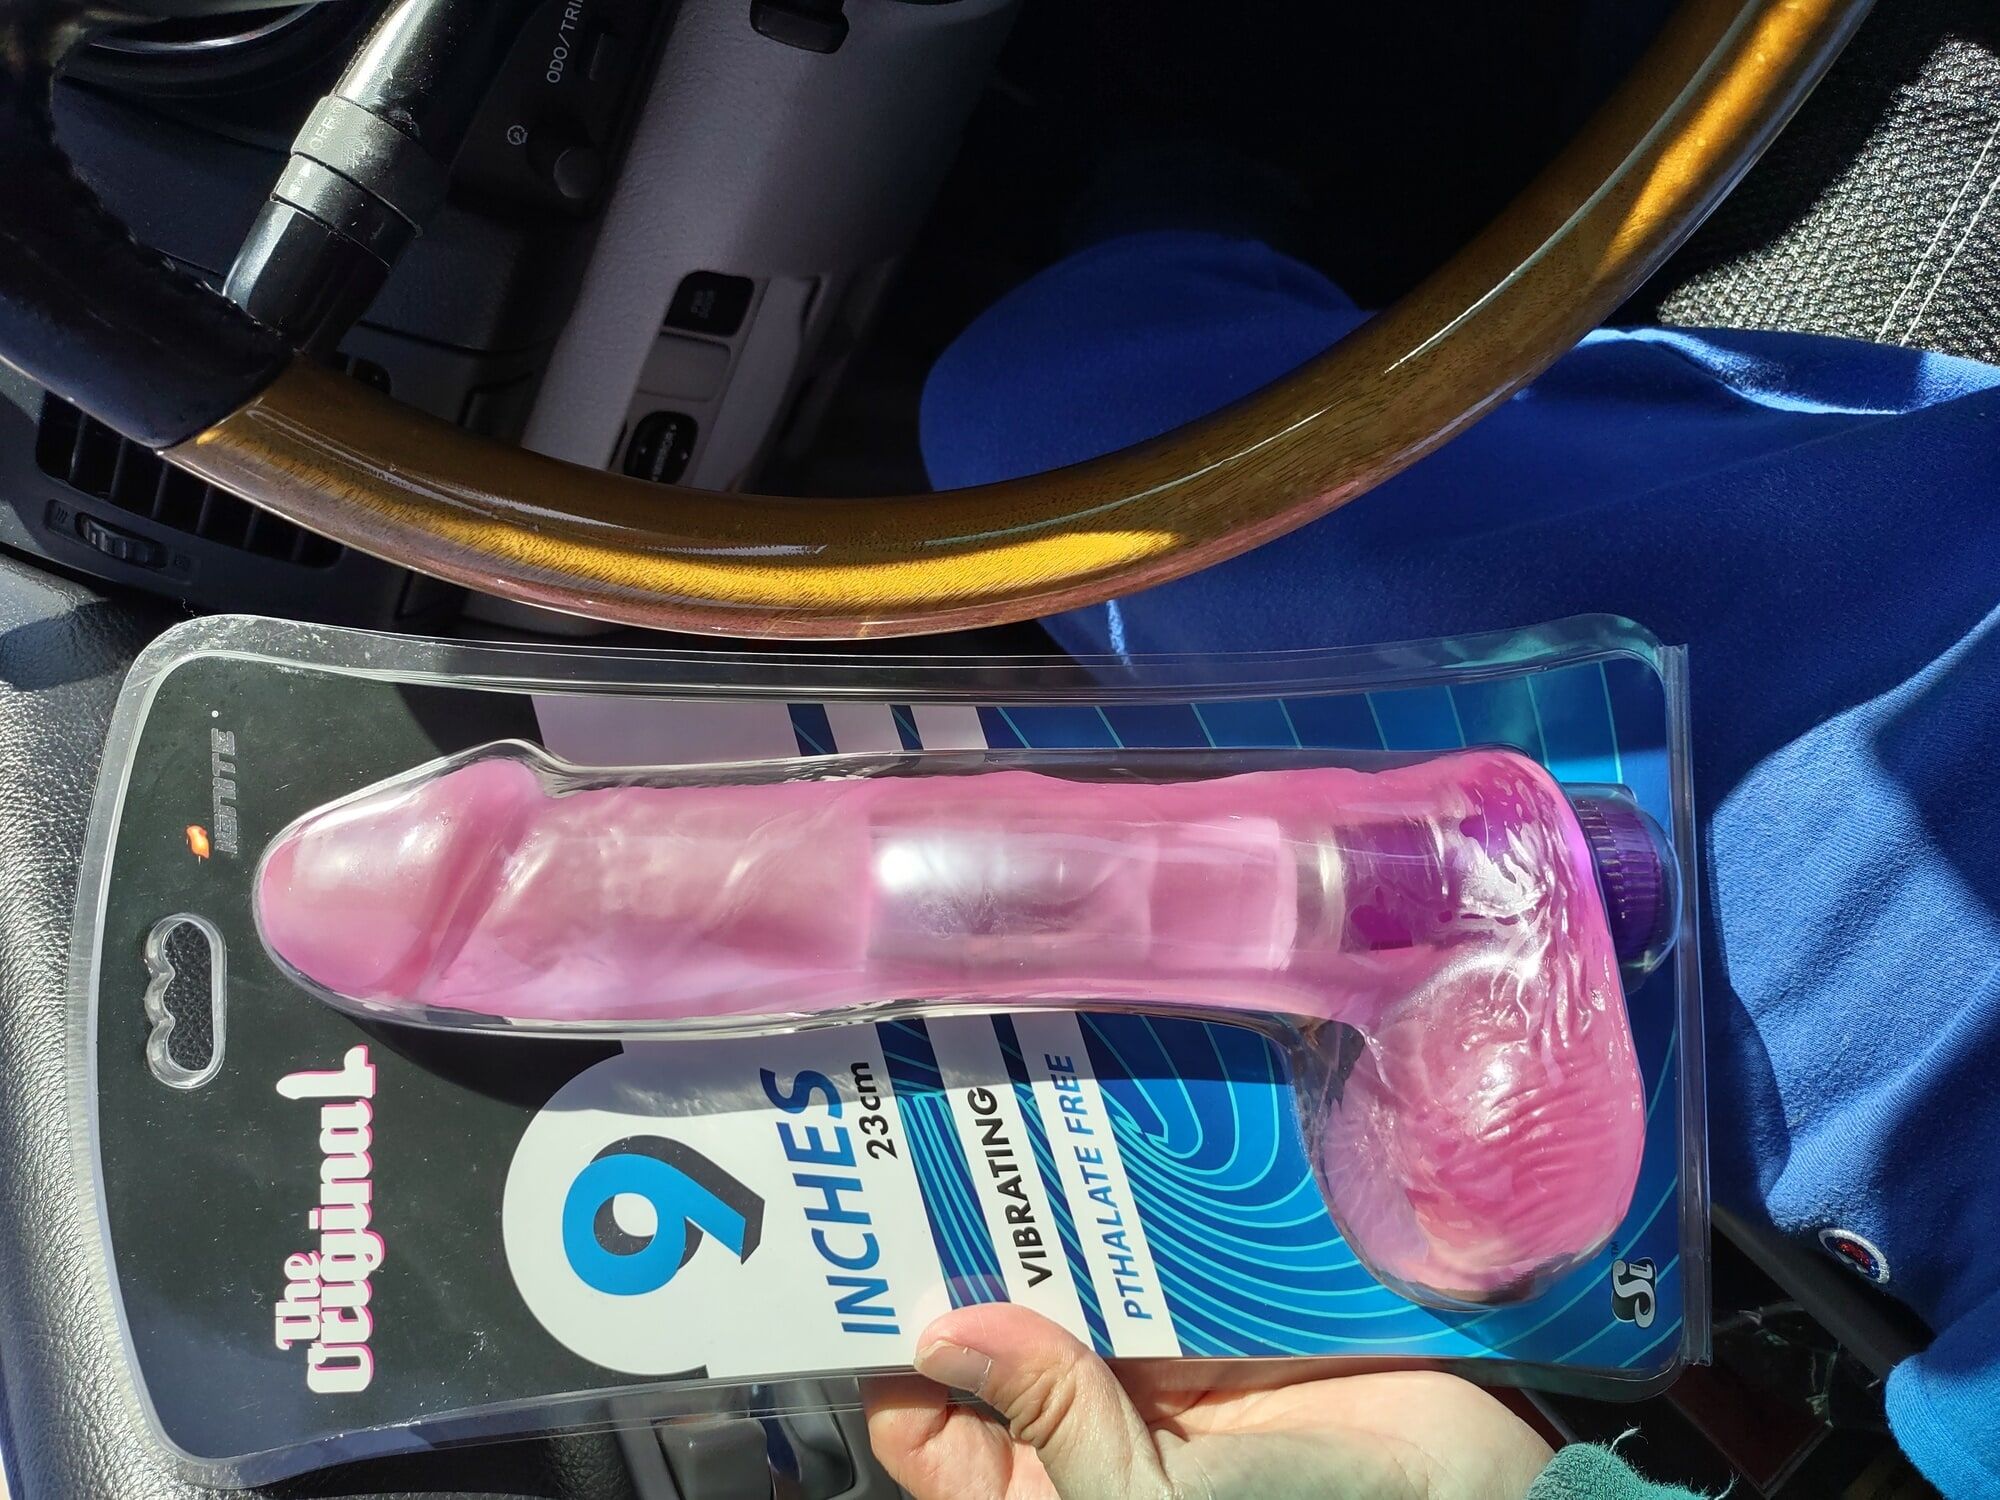 New sex toys. Hollow tubes for inserting and giant dildo